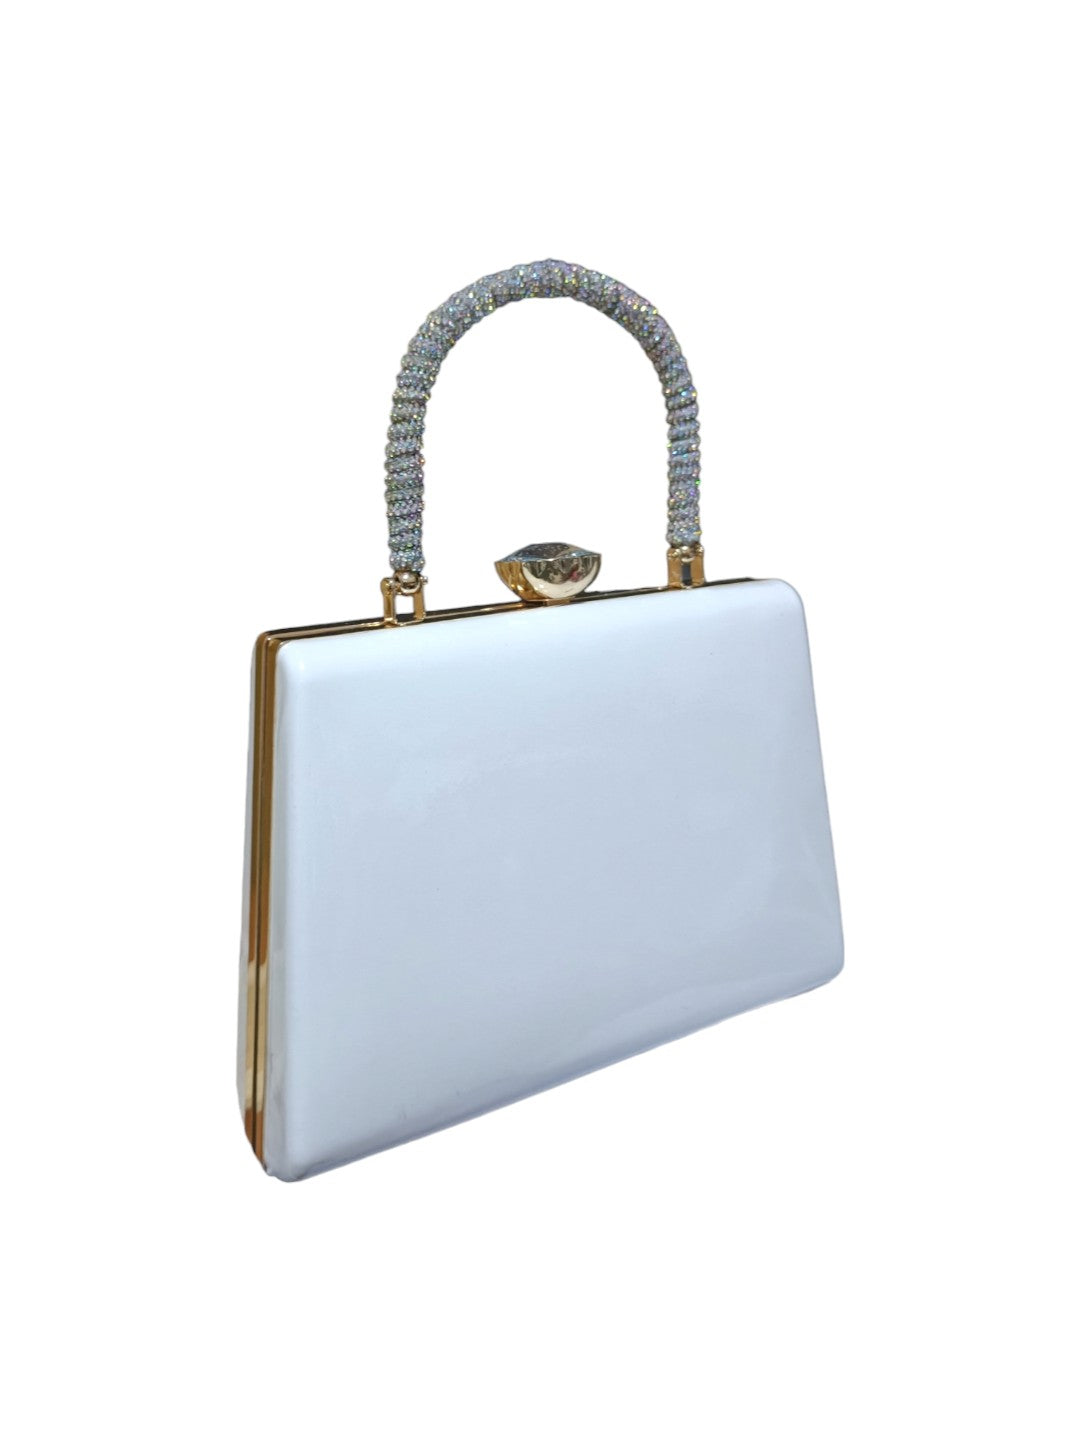 A Vdesi handle clutch perfect for a formal event. 